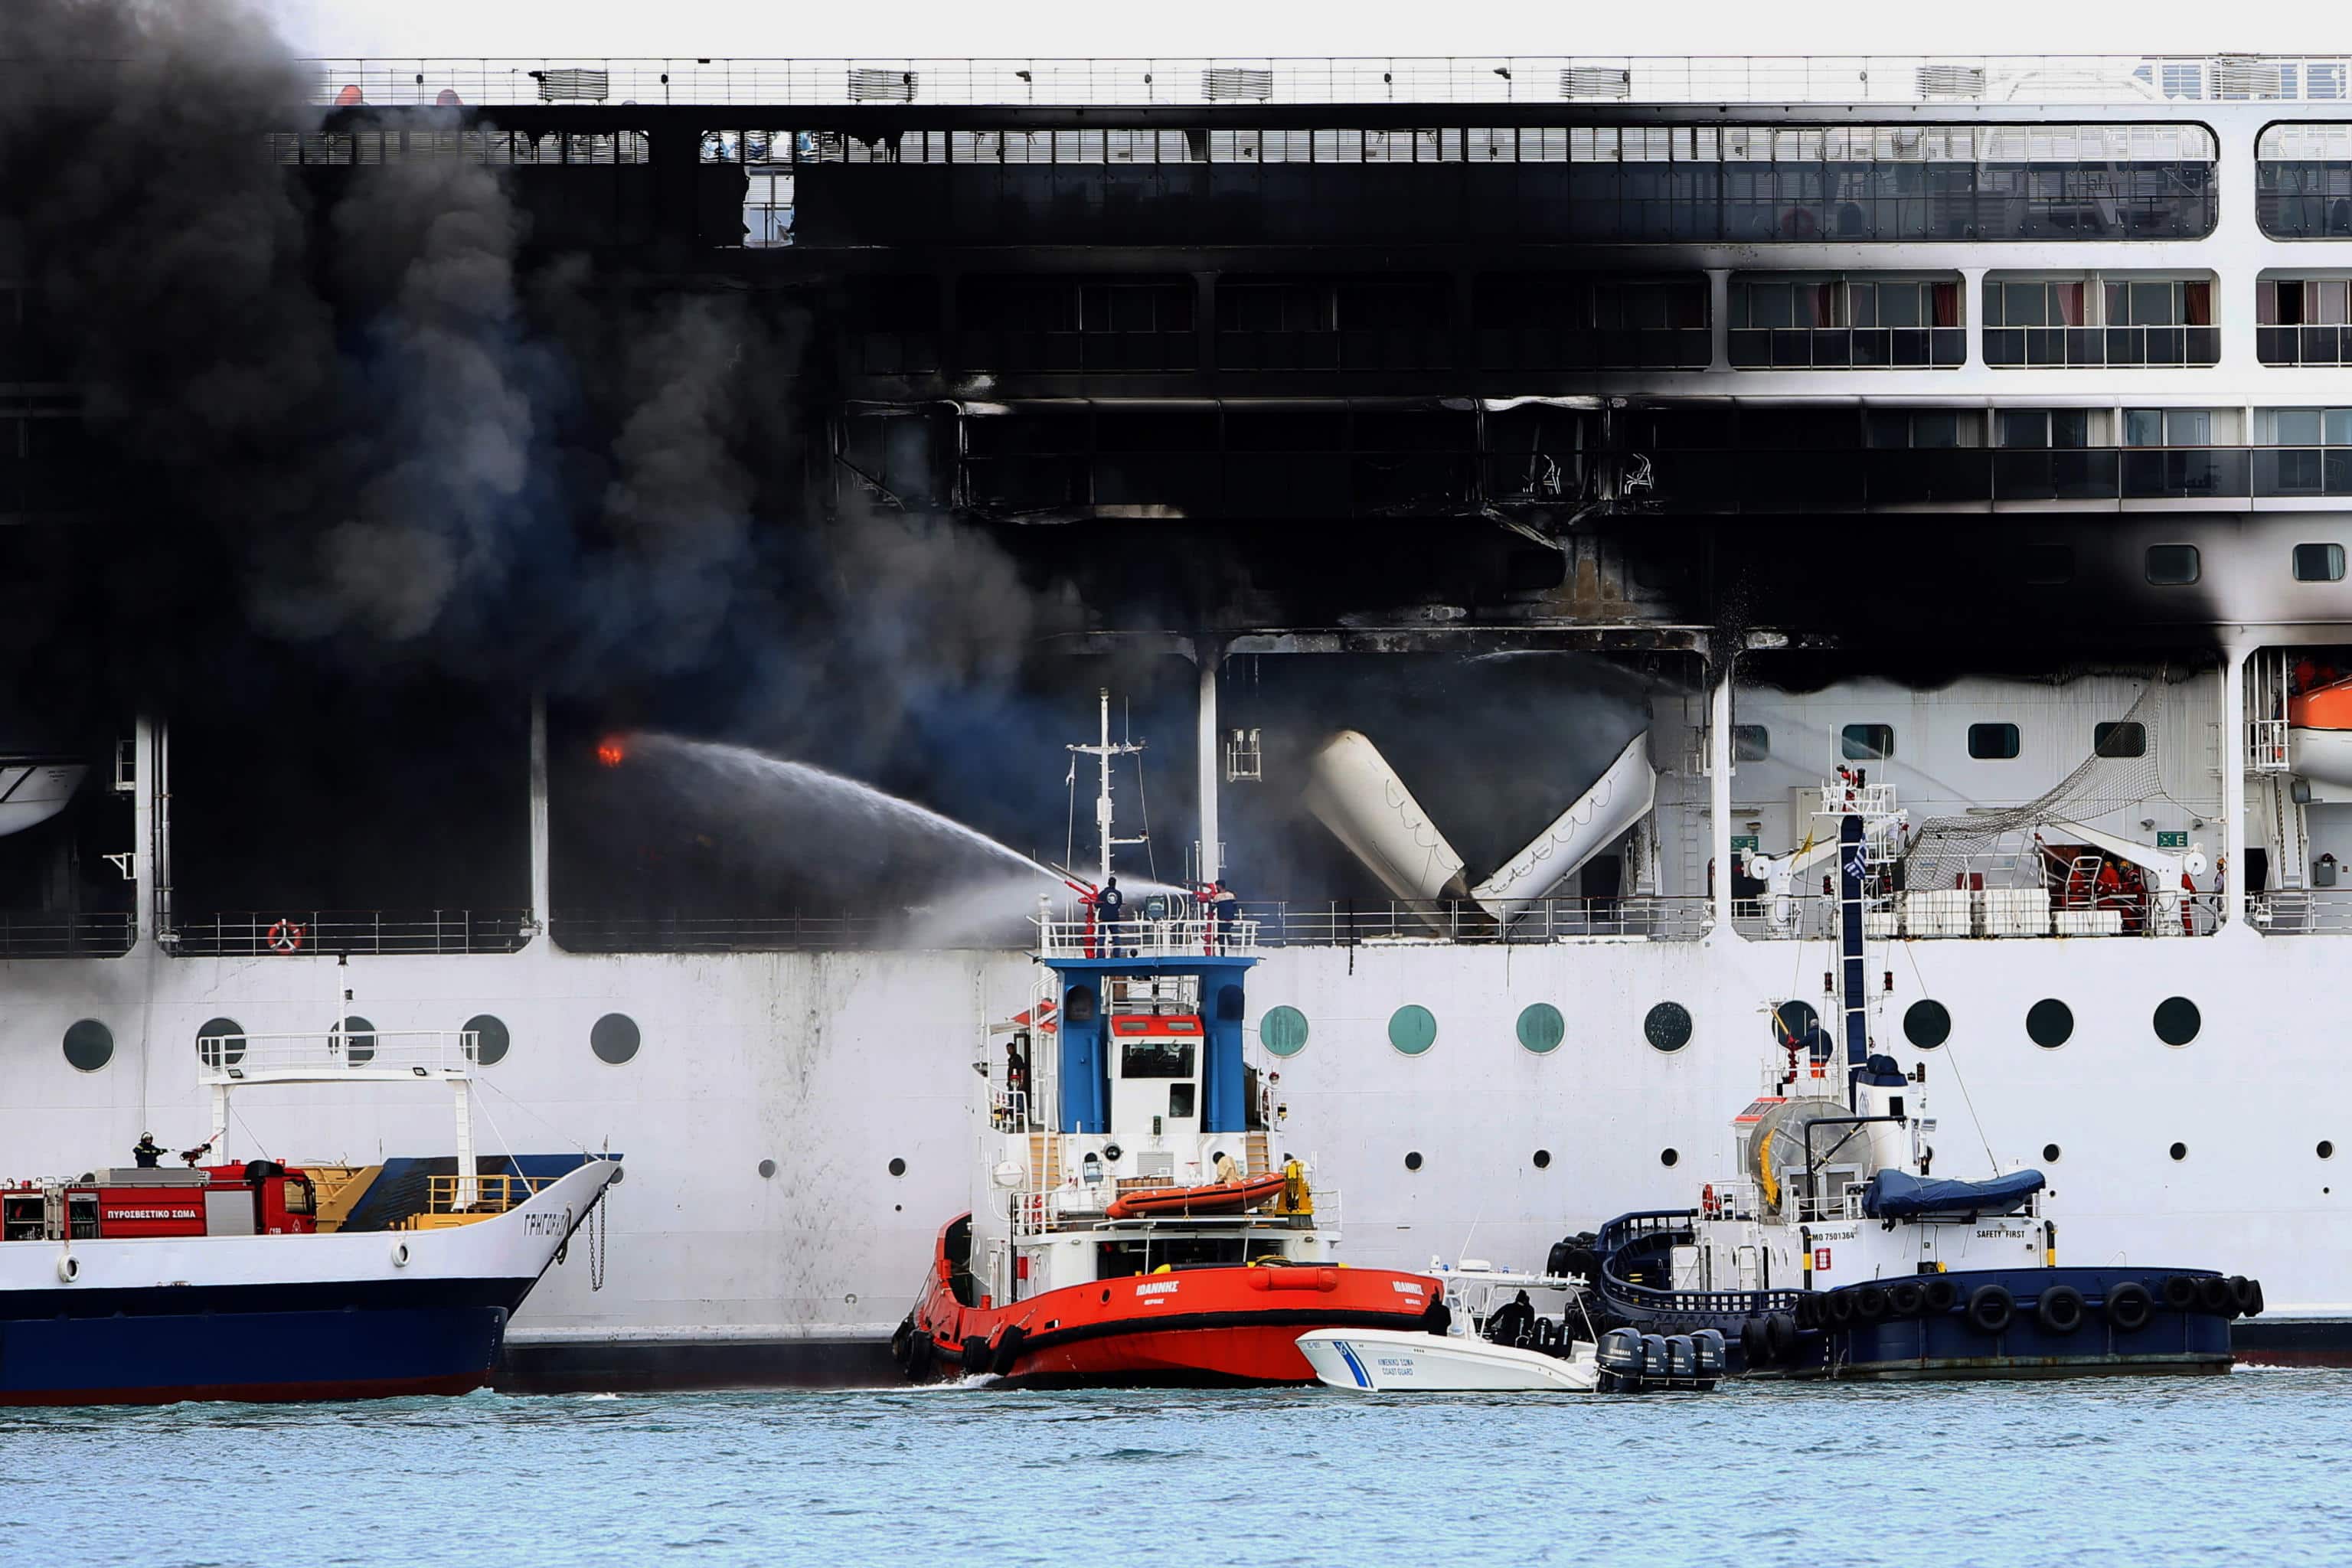 epa09069962 A fire broke out  on the 'MSC Lirica' cruiseship on 12 March 2021, while it was tied at the Corfu port, Ionian Sea, Greece, since January 30 for the winter season. Onboard were crew members only. The cause of the fire, which broke out at starboard, was not made known as of this writing. Firefighters were trying to put out the blaze.  EPA/STAMATIS KATAPODIS